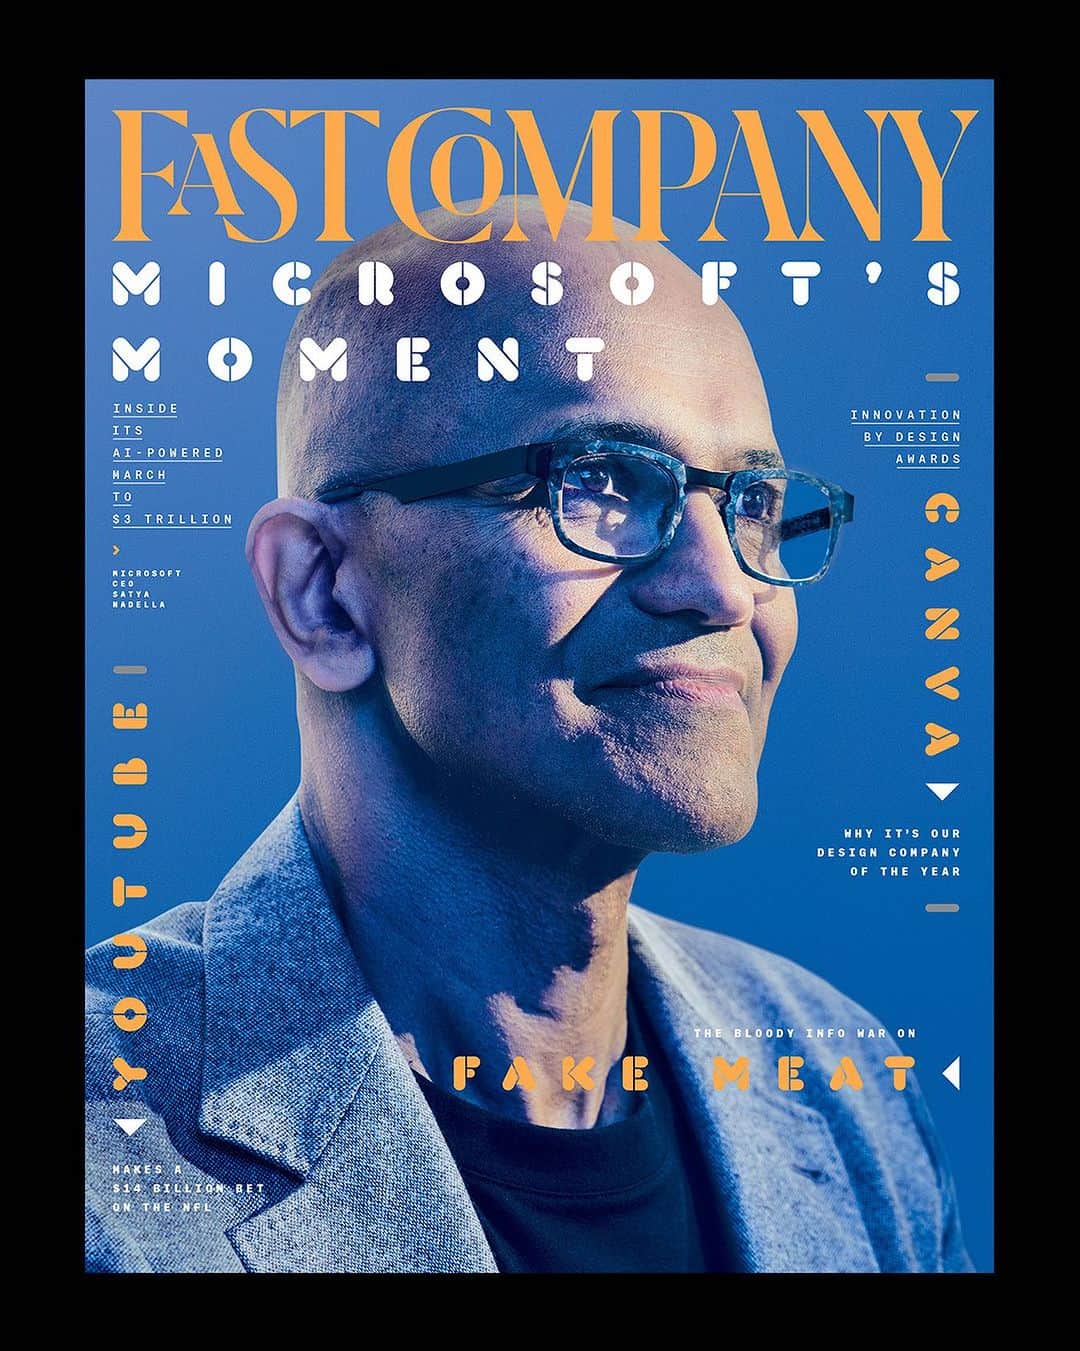 Microsoftのインスタグラム：「Microsoft CEO Satya Nadella has steered the company to pole position in the AI race. ⁠ ⁠ Nadella struck a landmark partnership with ChatGPT creator OpenAI, which—in return for a reported $13 billion investment—gives the software giant first dibs at the startup’s current and upcoming technologies. As the results have started showing up in new versions of @Microsoft products—from GitHub to Bing to Excel to Azure—they’ve greatly boosted the company’s standing in relation to peers such as Amazon and Google. For the first time since its 1990s heyday, the company is widely regarded as the pacemaker in technology’s next historic wave of change.⁠ ⁠ Microsoft has been reengineering itself into an AI company for some time—quietly but dramatically. “What happened in the last five months,” he says, “was work of the last 10 years.”⁠ ⁠ Read more about how Nadella intends to hold on to a lead that’s anything but certain in the September 2023 cover story at the link in our bio.⁠ ⁠ [Photo: Ian Allen]」